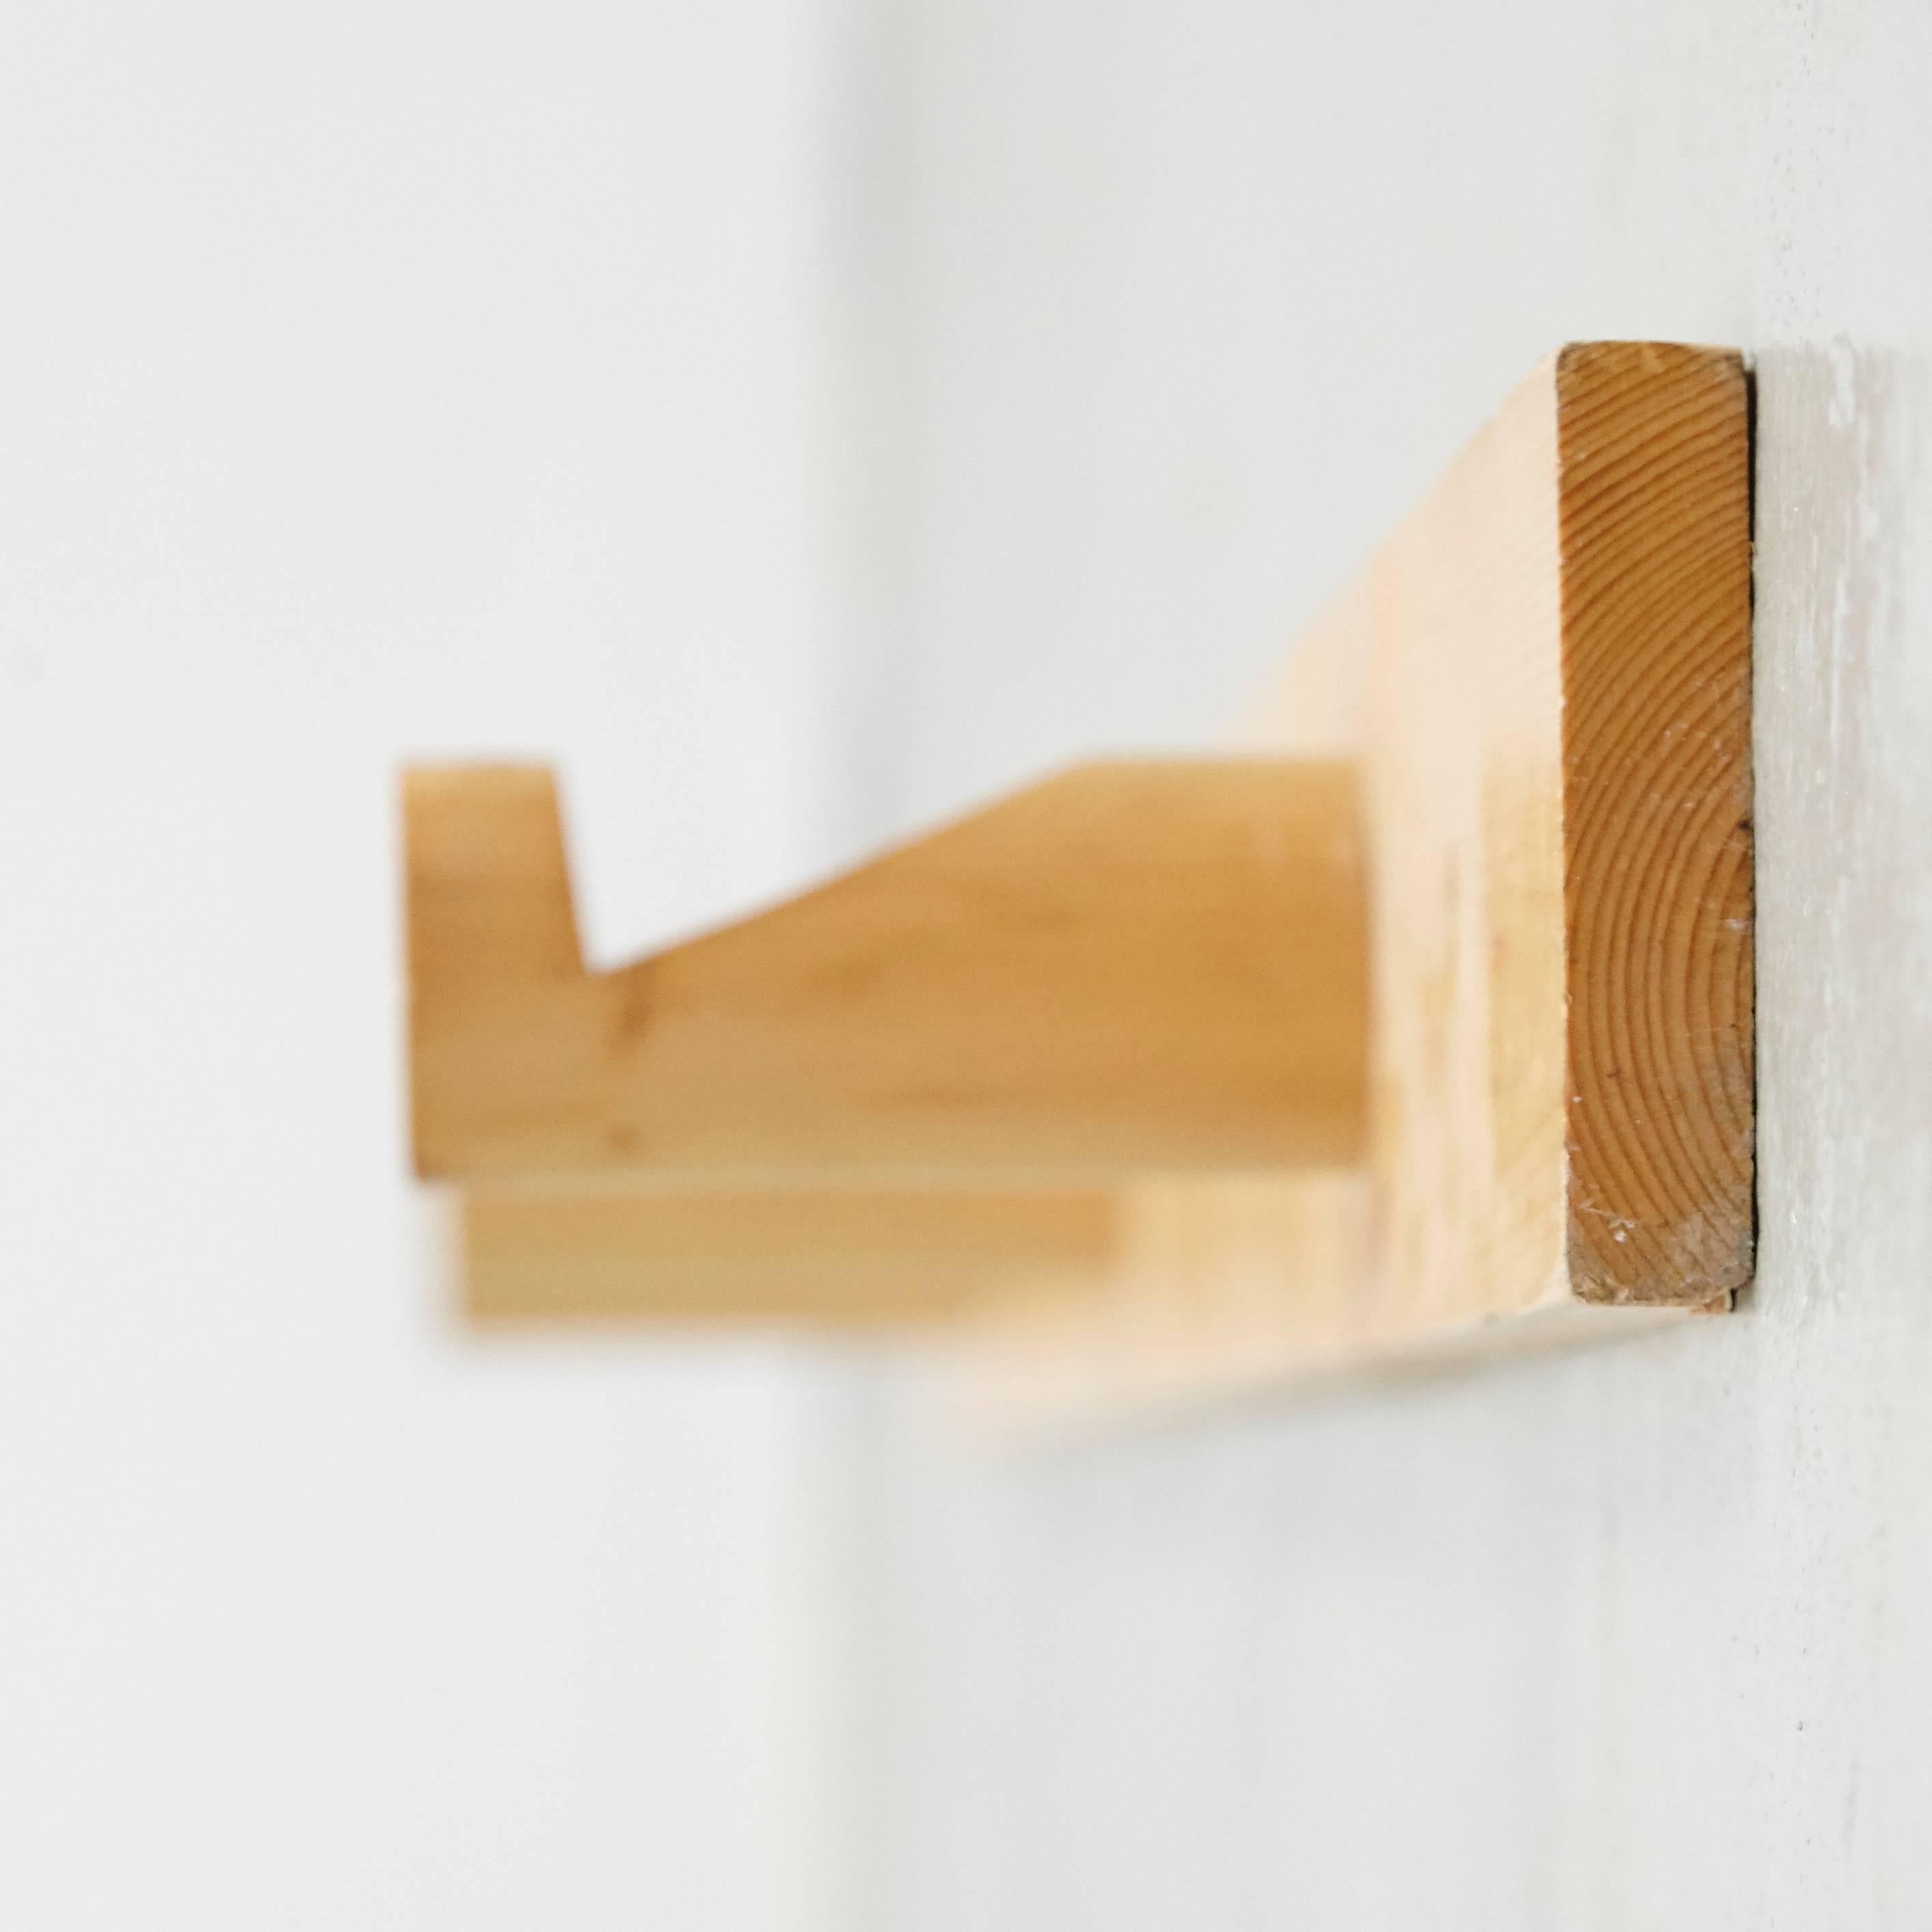 Coat rack designed by Charlotte Perriand for Les Arcs ski Resort, circa 1960 manufactured in France.
Pinewood.

In good original condition, with minor wear consistent with age and use, preserving a beautiful patina.

Charlotte Perriand